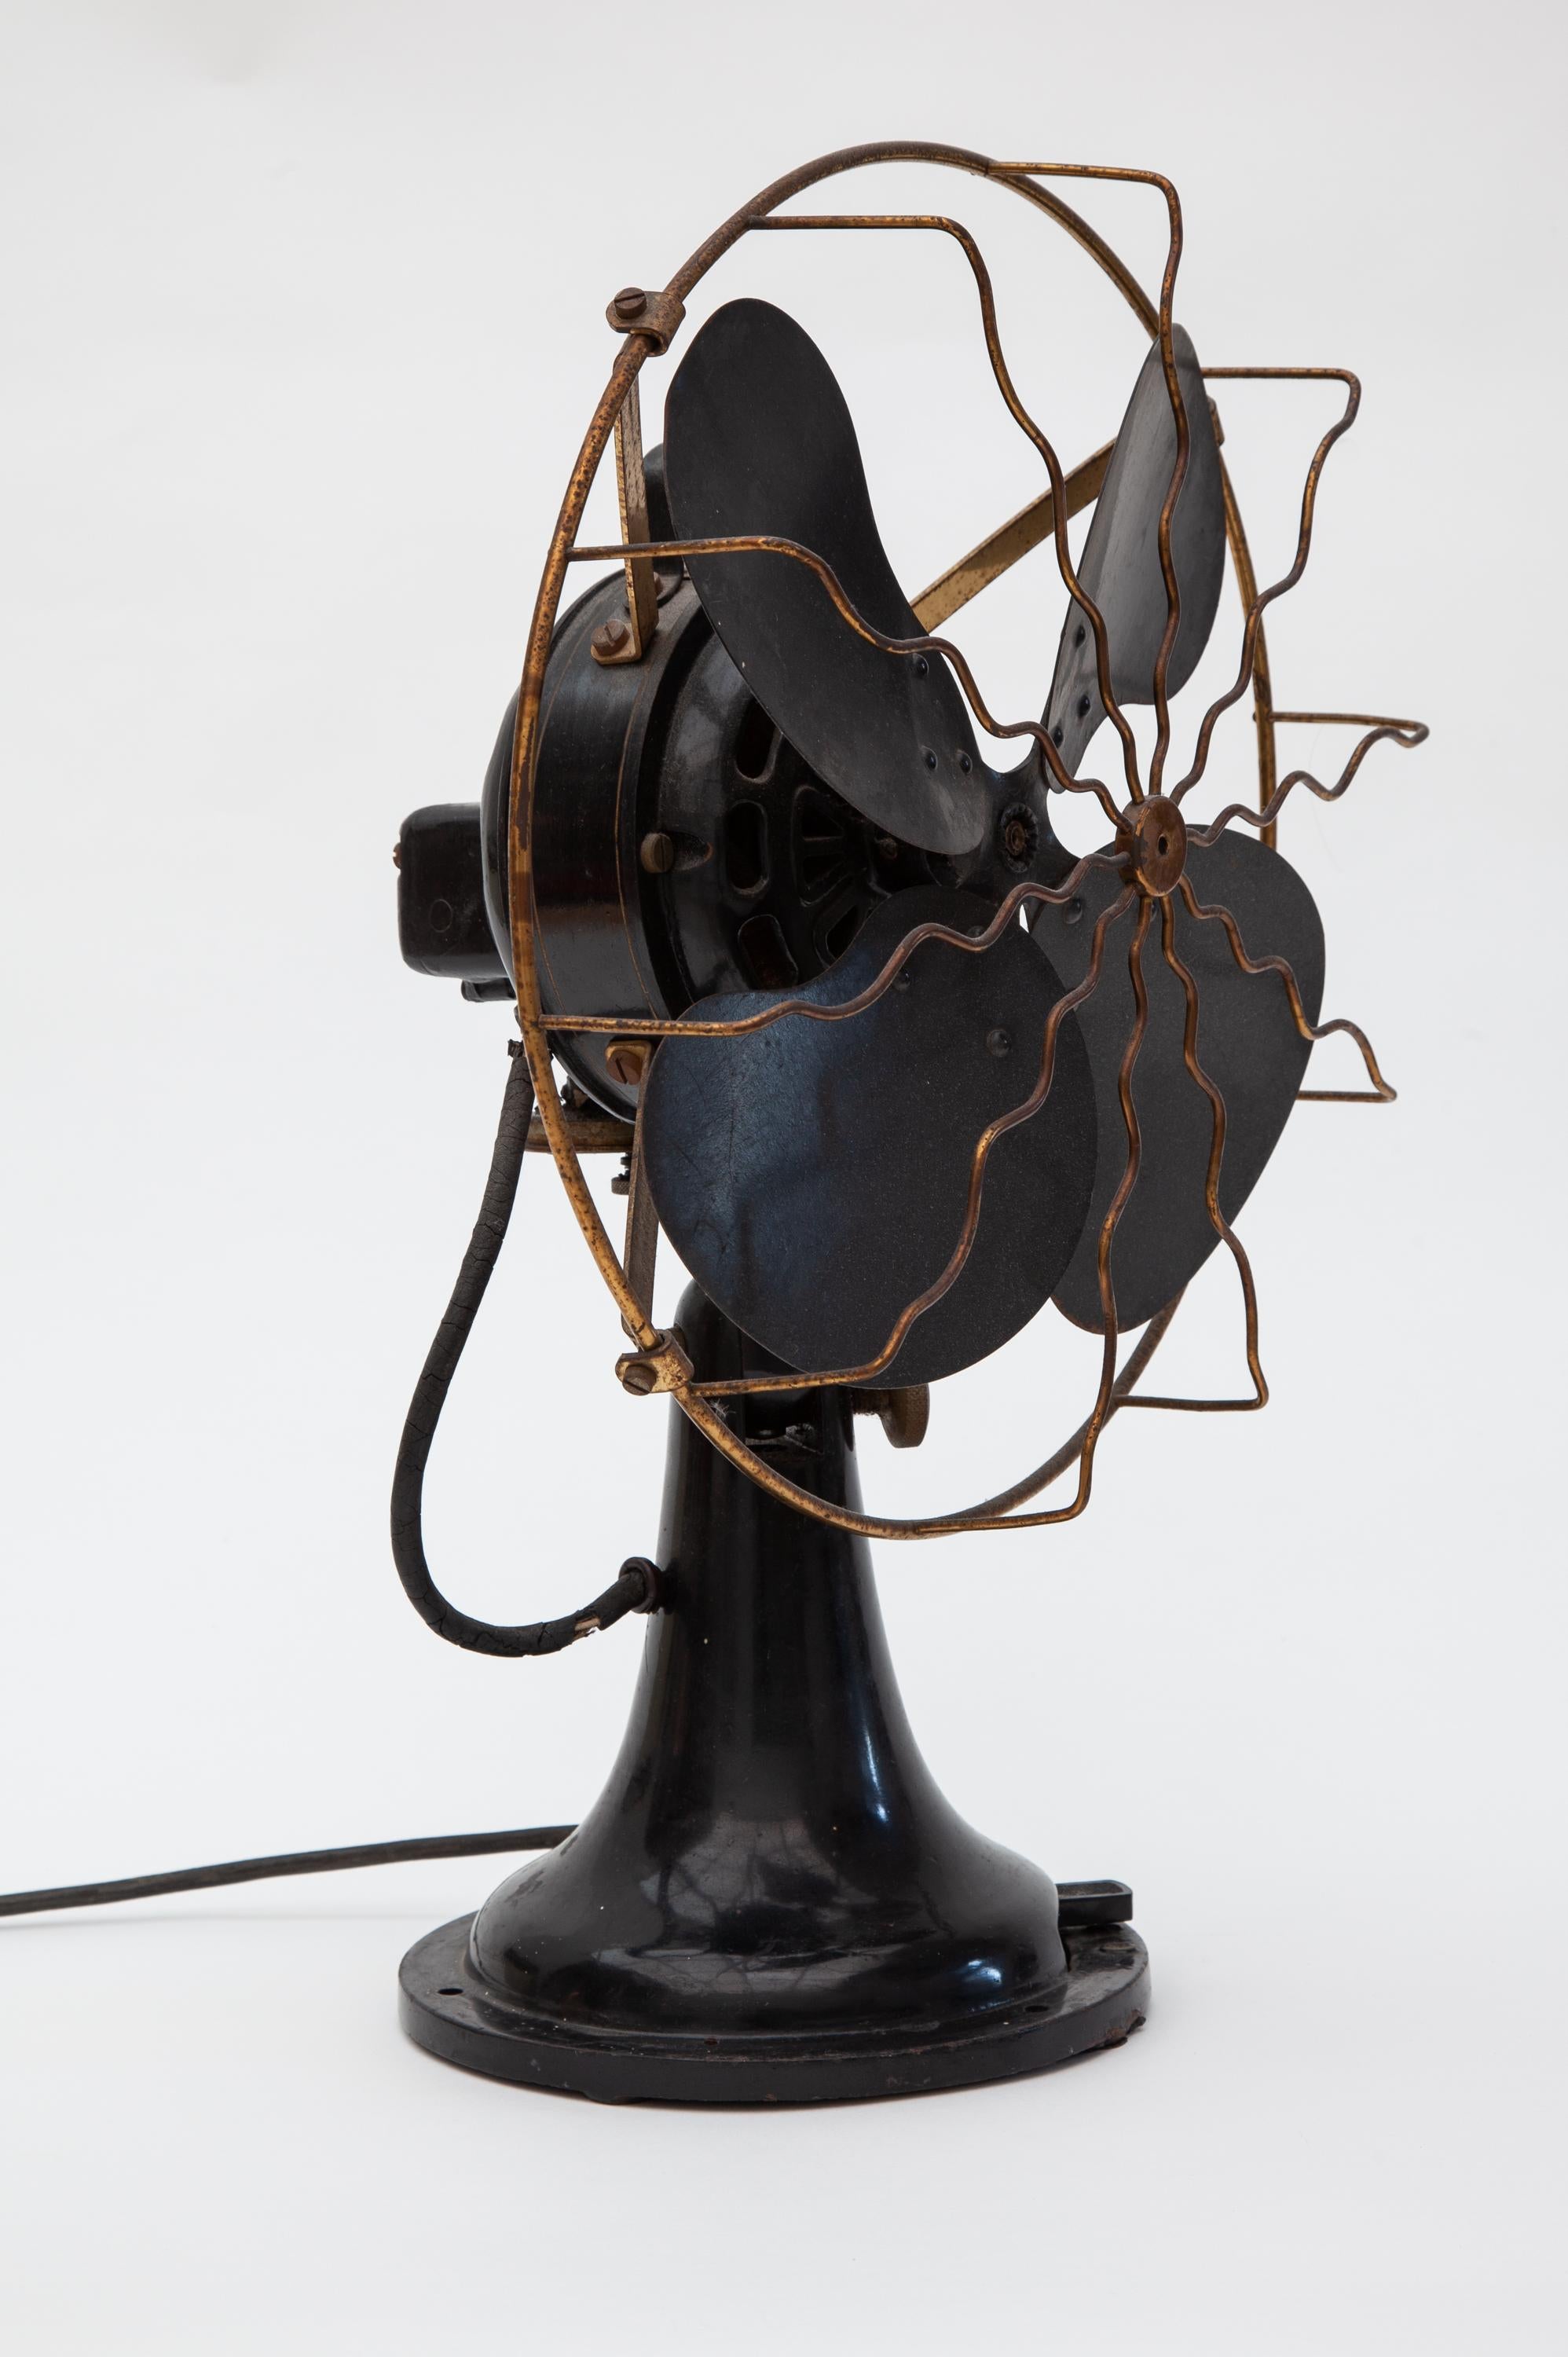 Electric fan manufacture E.M.I. Utrecht Holland.
Black and brass robust industrial fan from the 1930s.E.M.I. Utrecht Holland.
The fan has a cast iron base, enameled and the blades of the fan and the safety grid are made of brass.
 